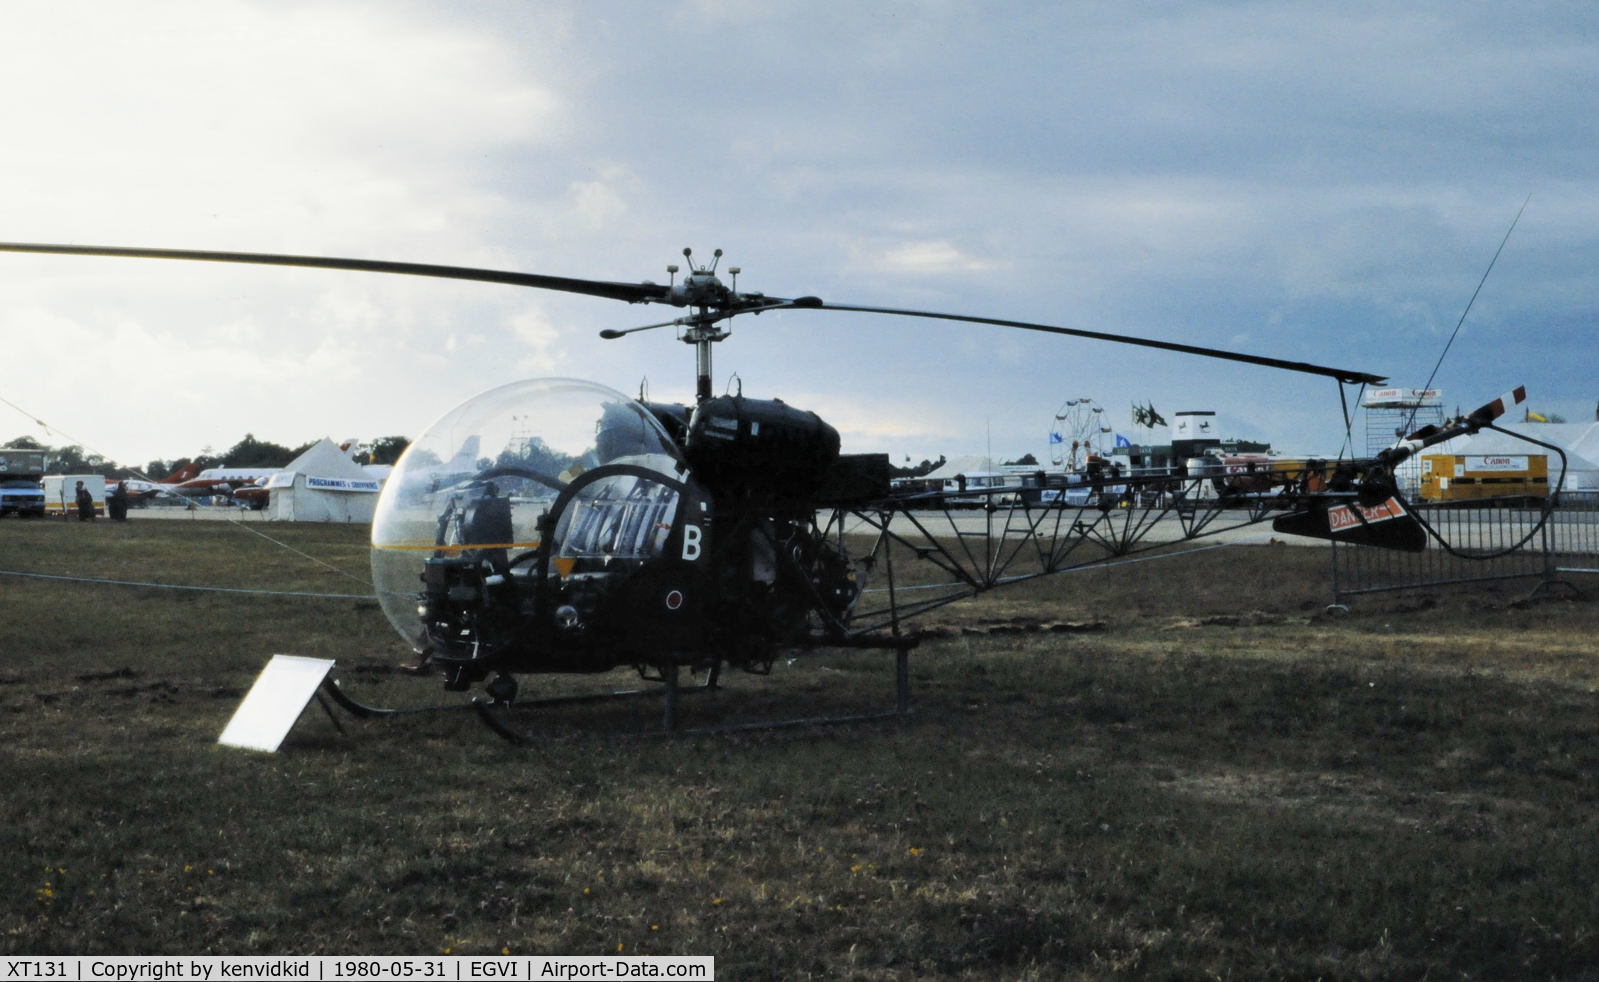 XT131, 1964 Westland Sioux AH.1 C/N 1540, At the 1980 International Air Tattoo Greenham Common, copied from slide.